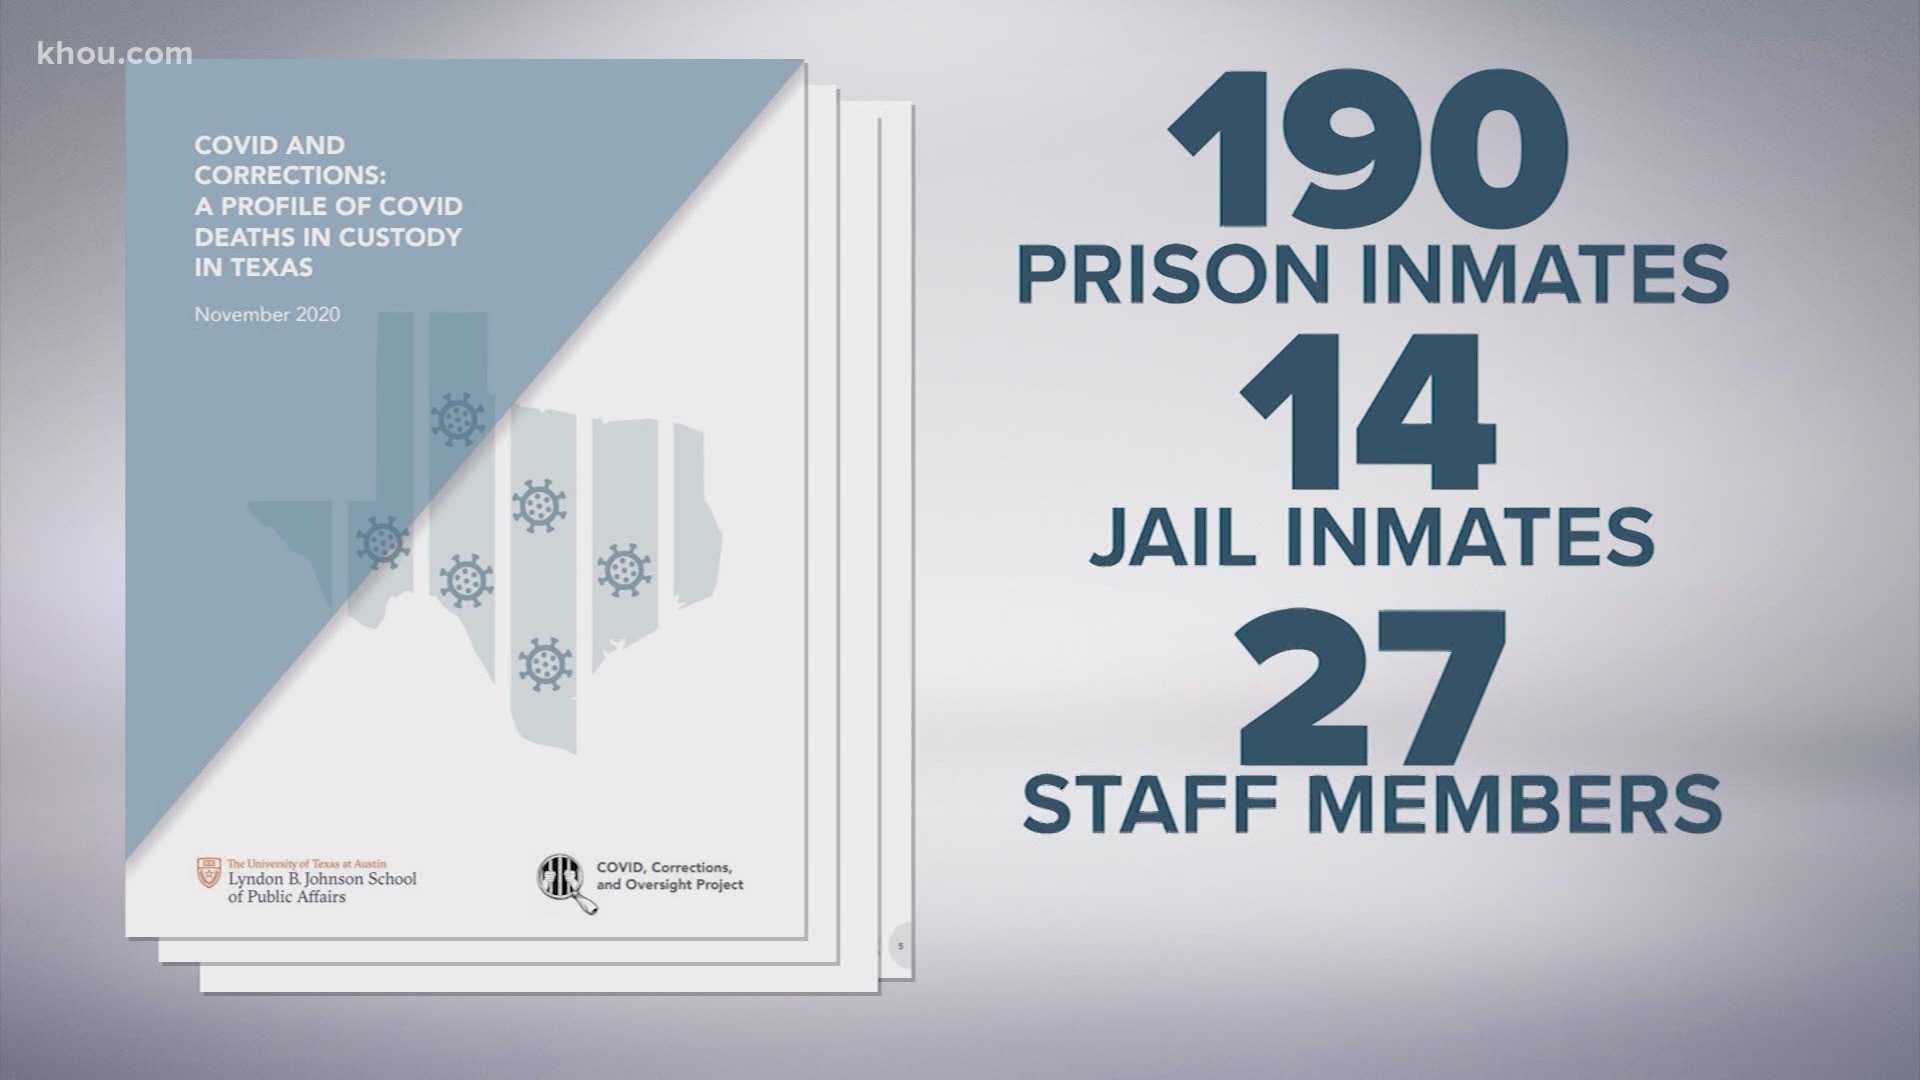 The report shows 231 people died from COVID-19 in correctional facilities: 190 prison inmates, 14 jail inmates and 27 staff members.